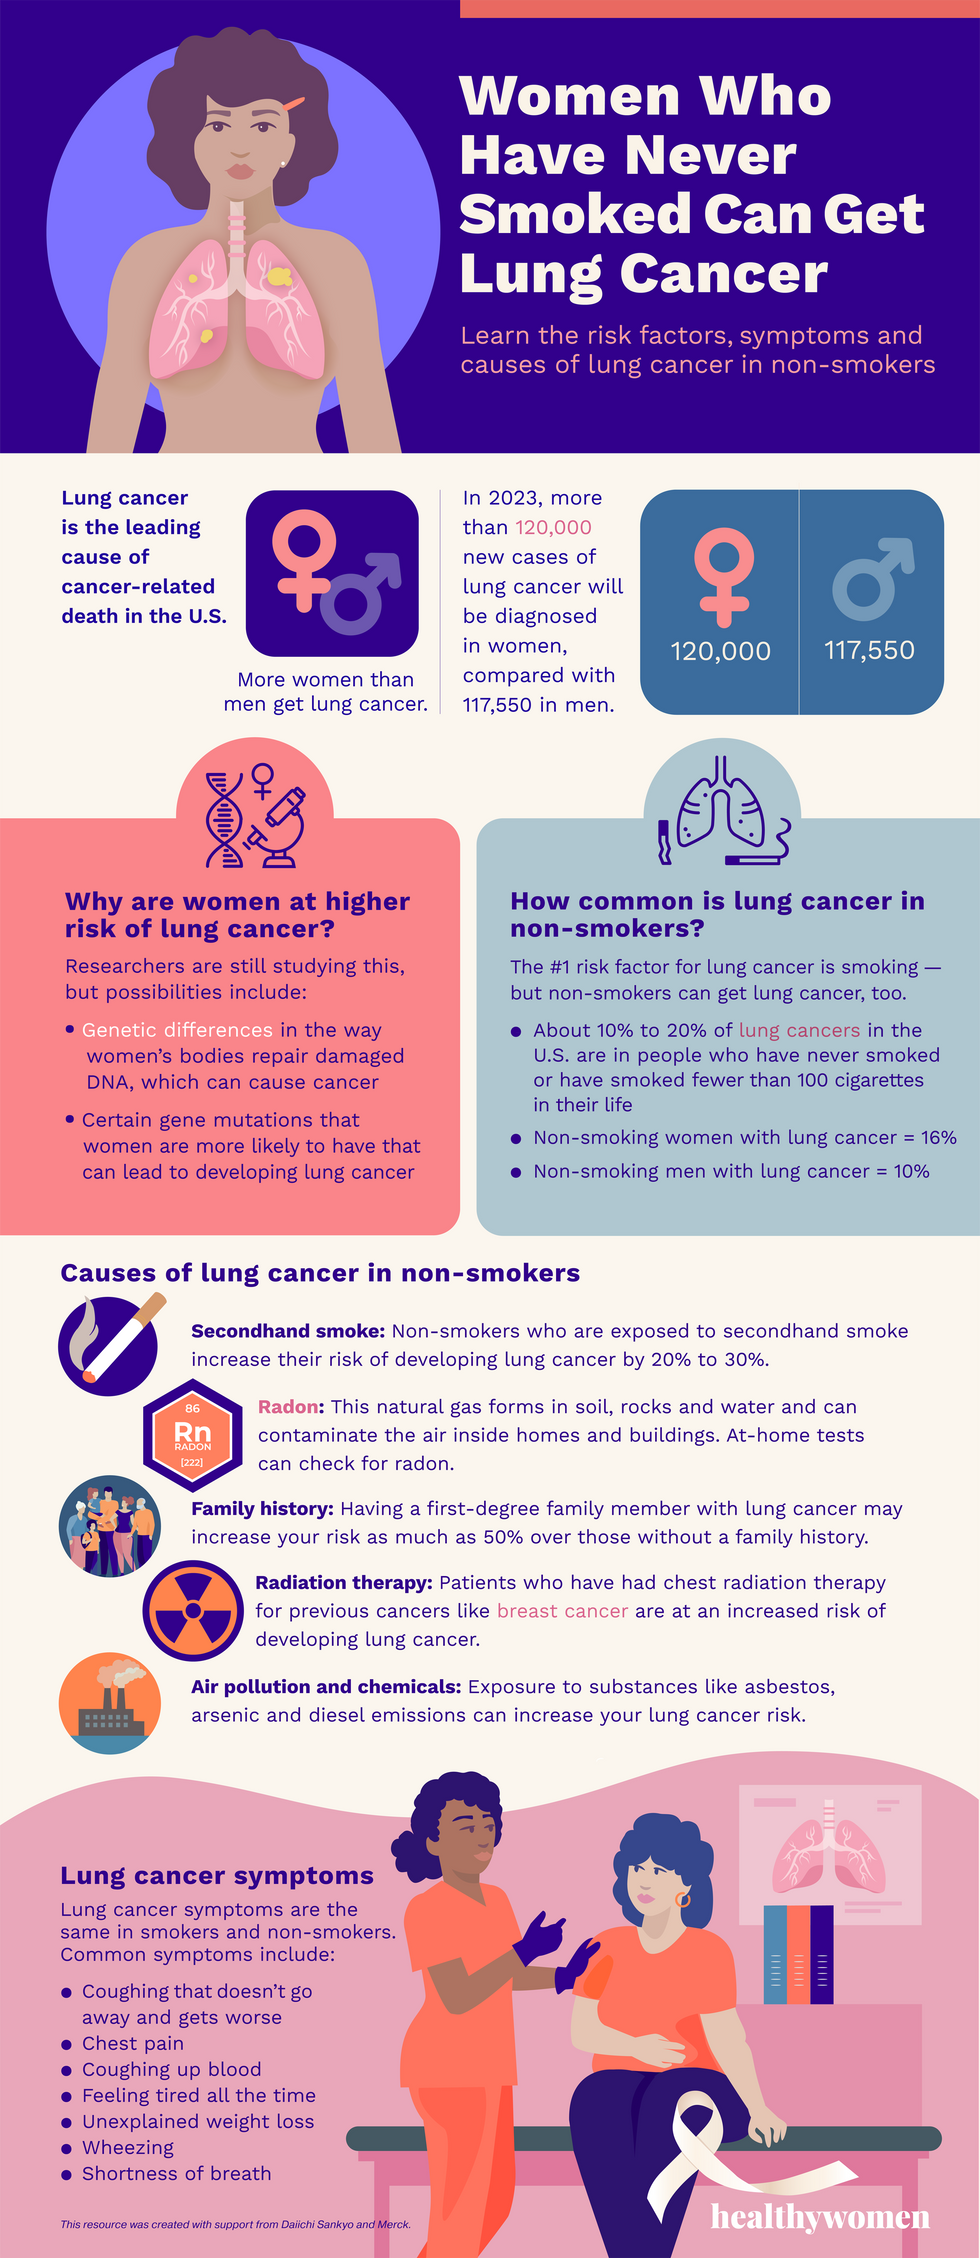 Infographic Women Who Have Never Smoked Can Get Lung Cancer. Click image to view pdf.